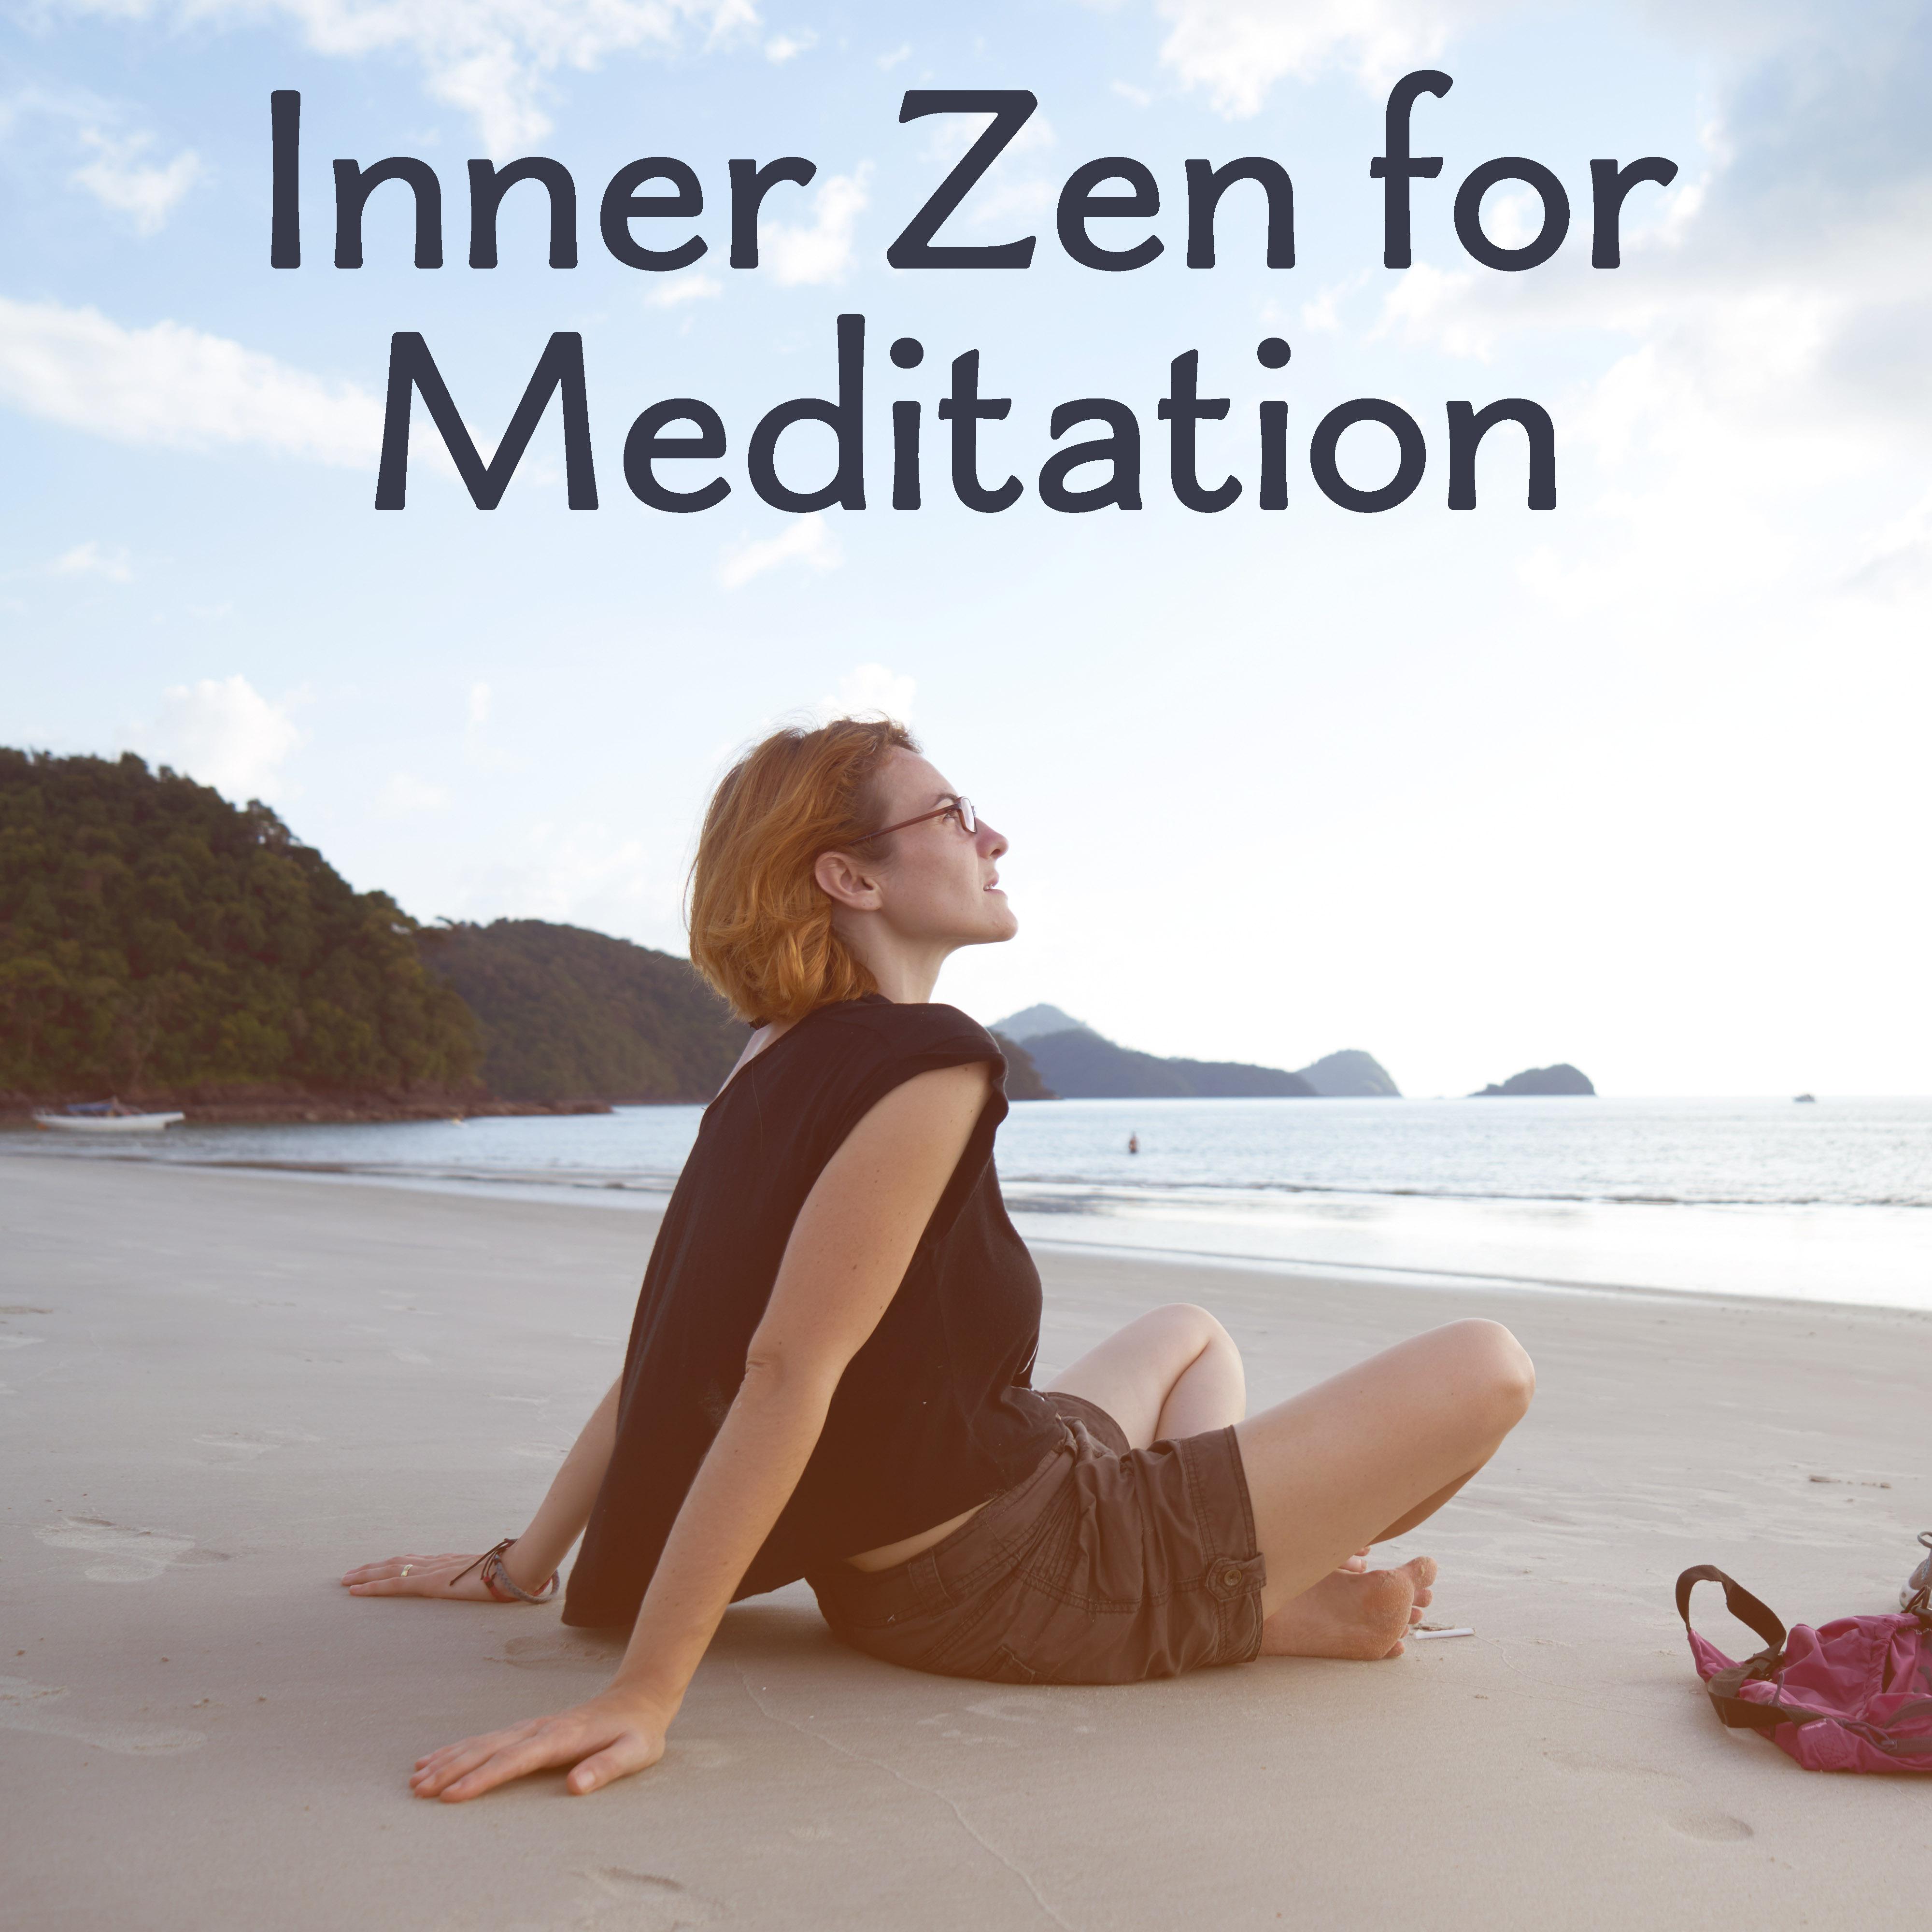 Inner Zen for Meditation – Sounds of Yoga, Meditate, Relaxation, Chakra Balancing, Ambient Music, Peaceful Mind